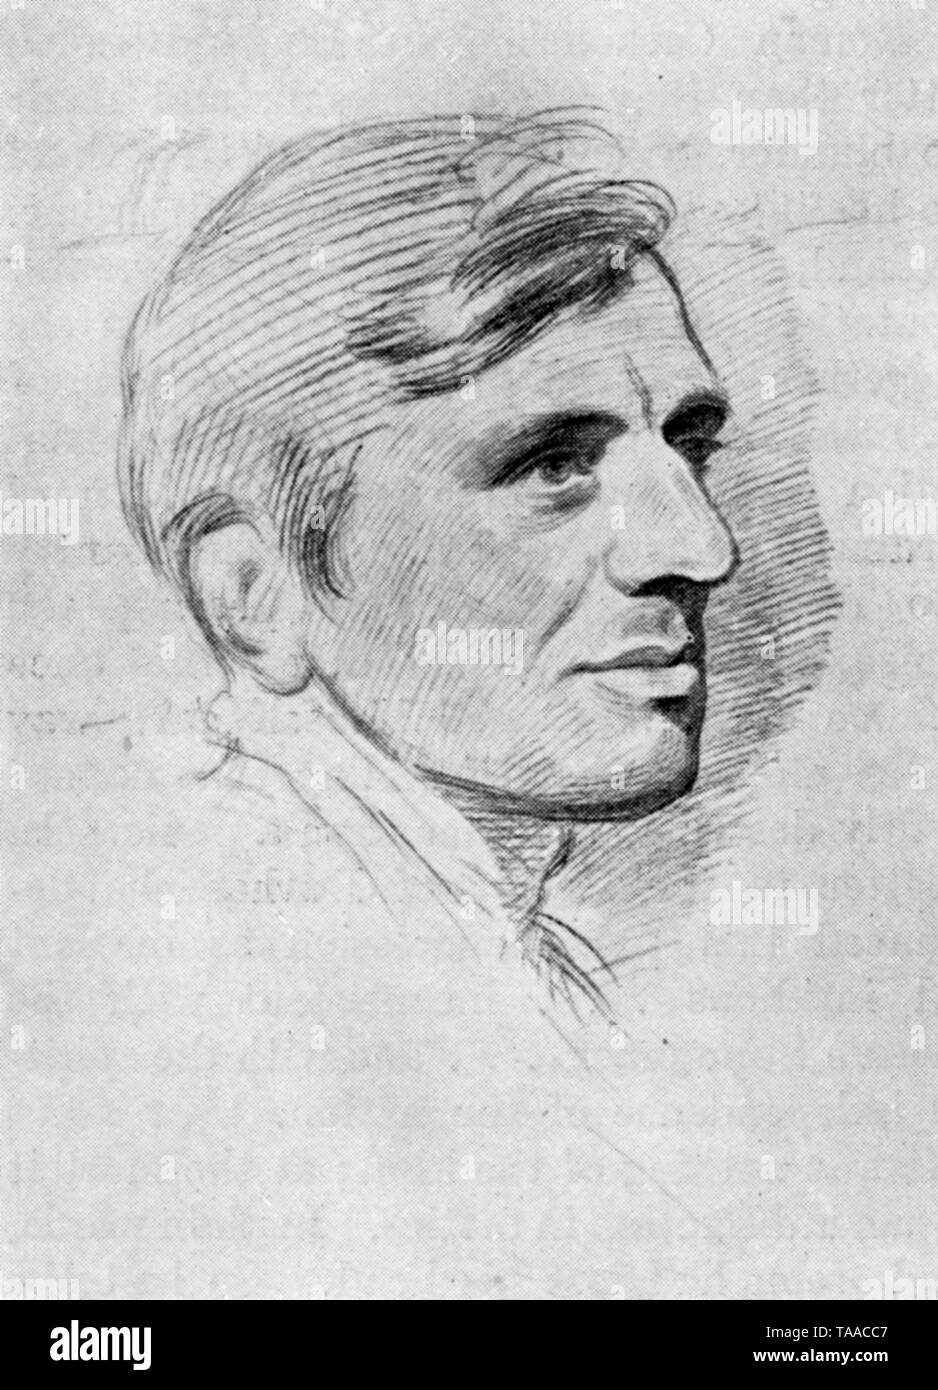 'John Henry Newman', 1844. From a chalk drawing by George Richmond (1809-1896). John Henry Newman (1801-1890) also know as Cardinal Newman and the Blessed John Henry Newman. Newman wished to return the Church of England to many Catholic beliefs and in 1845 he left the Church of England and was received into the Roman Catholic Church. Stock Photo